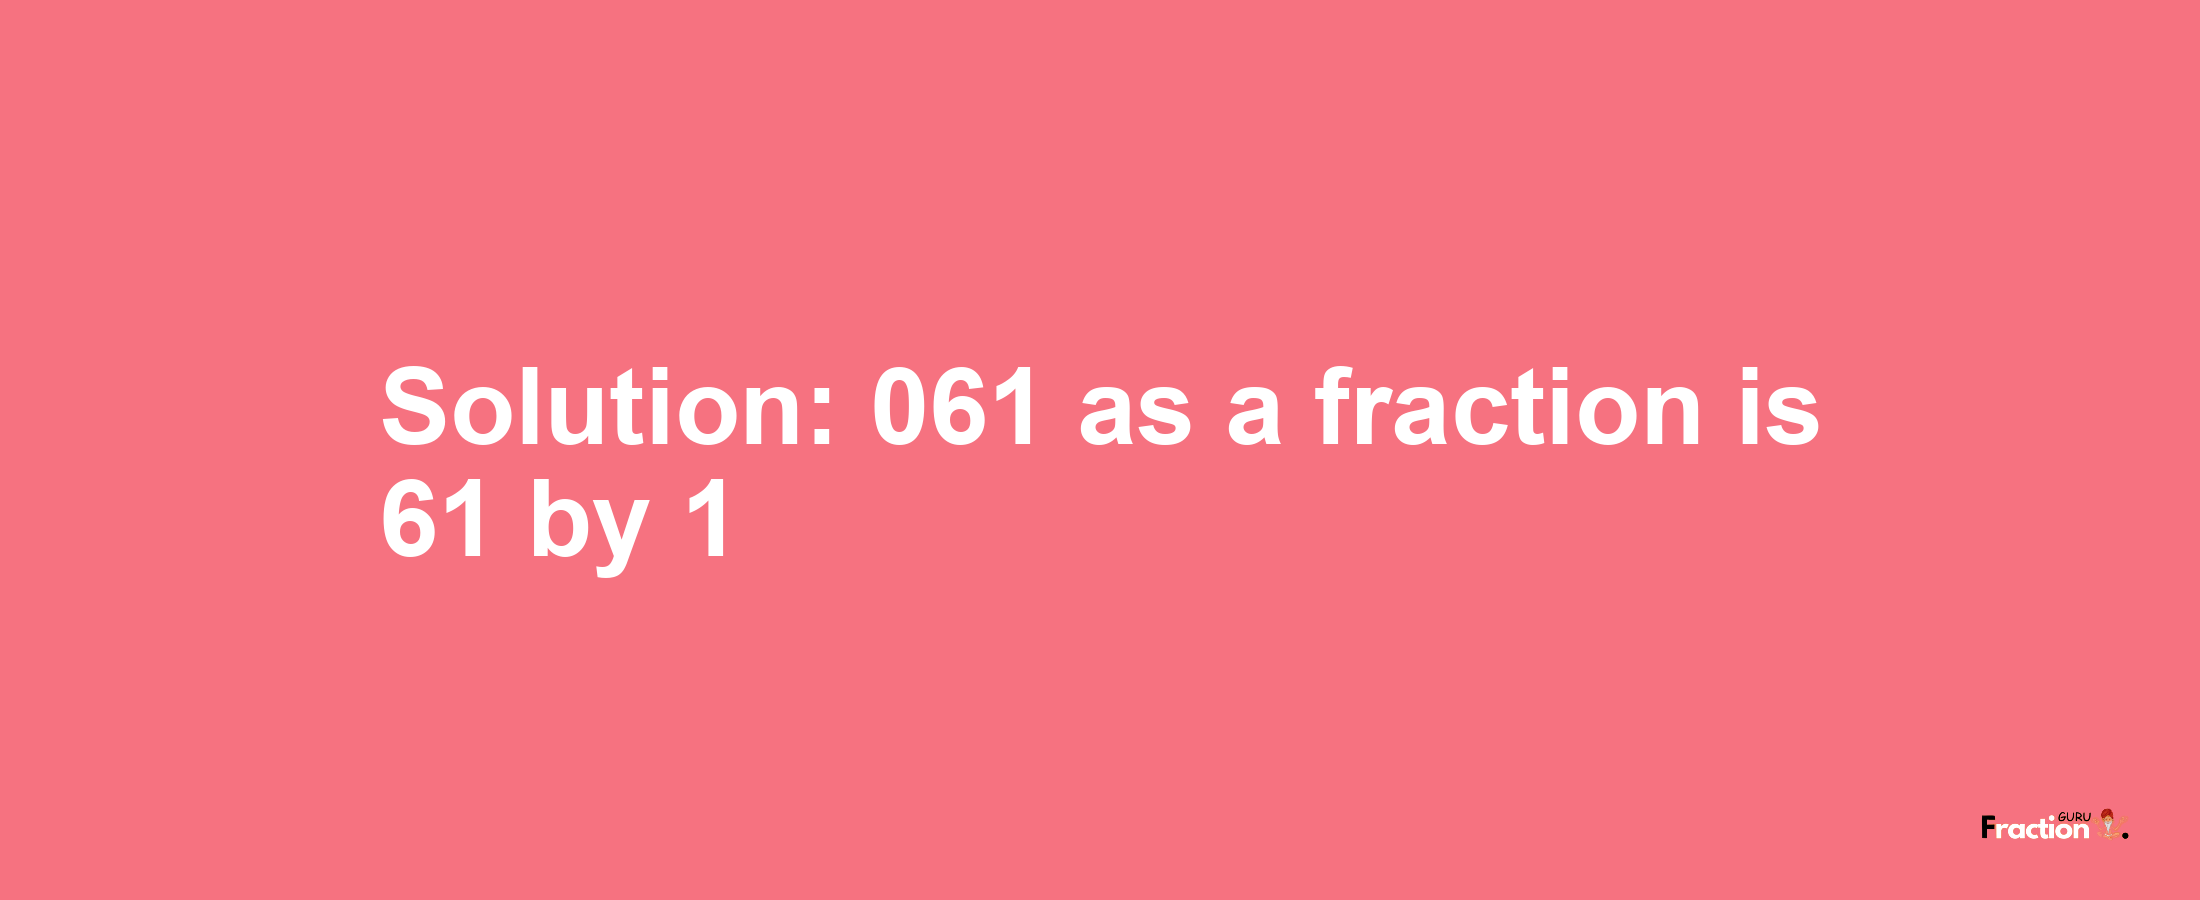 Solution:061 as a fraction is 61/1